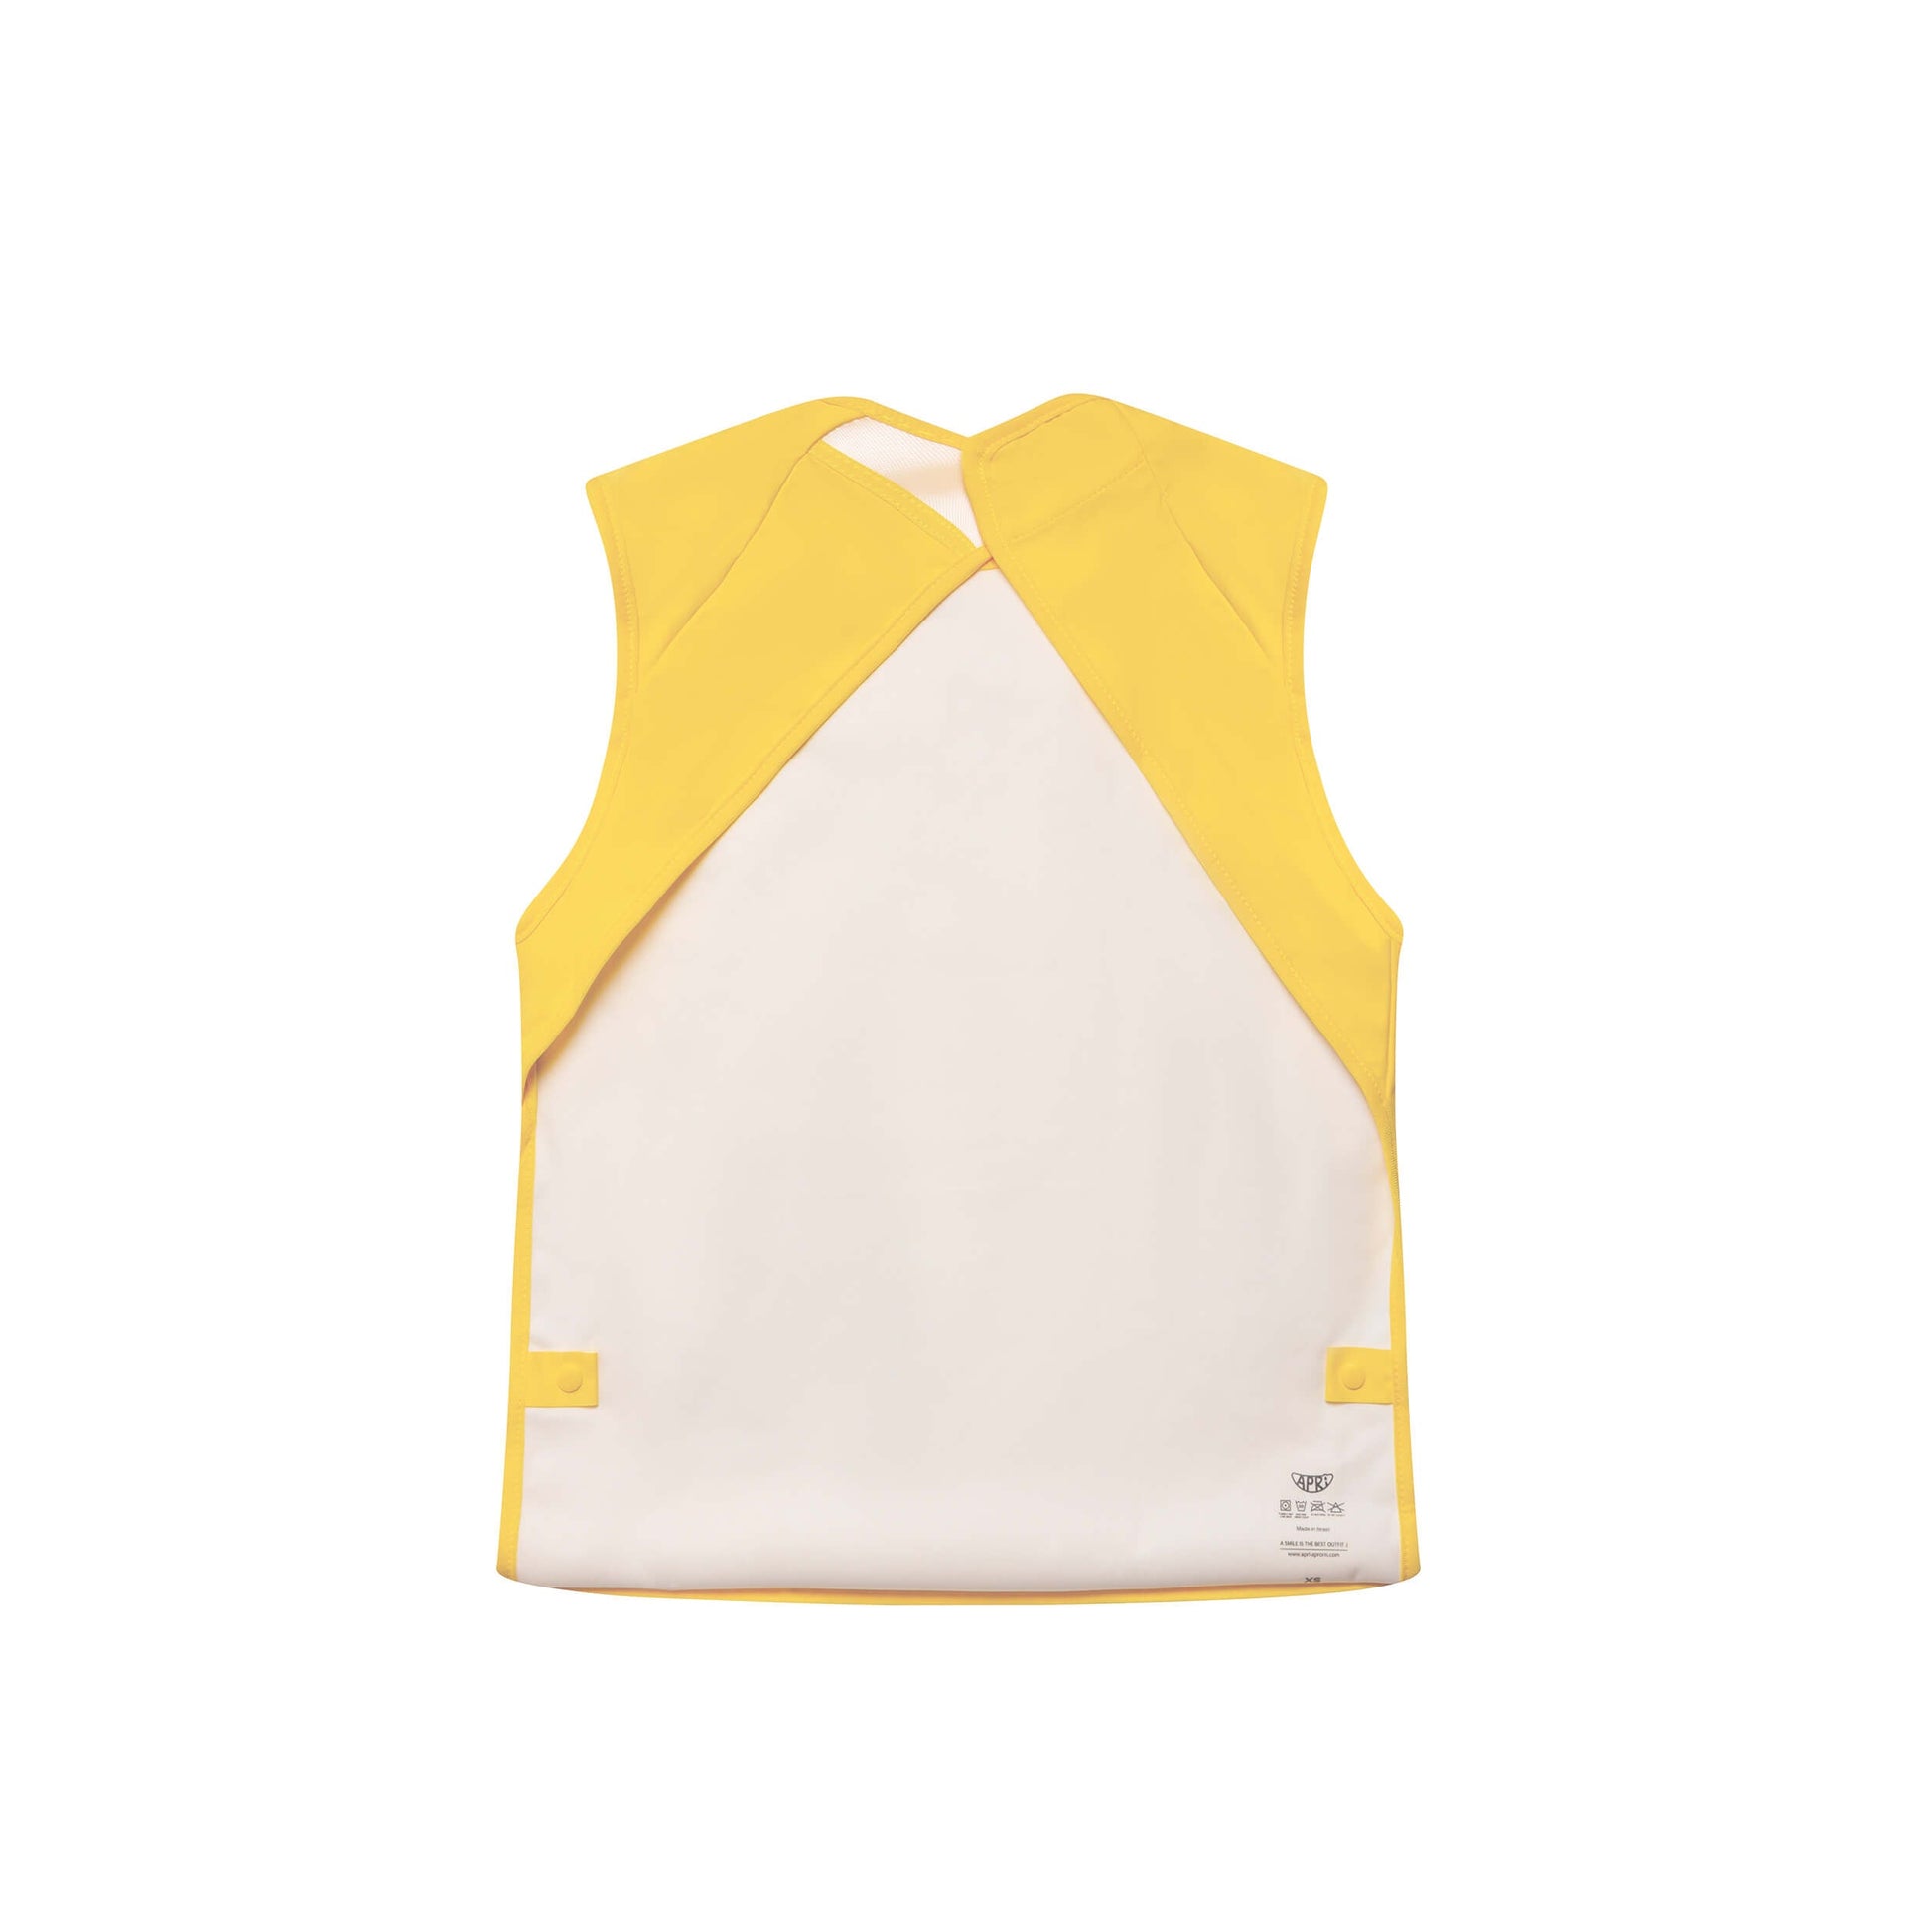 Apri Bibs: Washable special needs bib for kids, teens, and adults. Yellow cap sleeve with secure silicone fastener